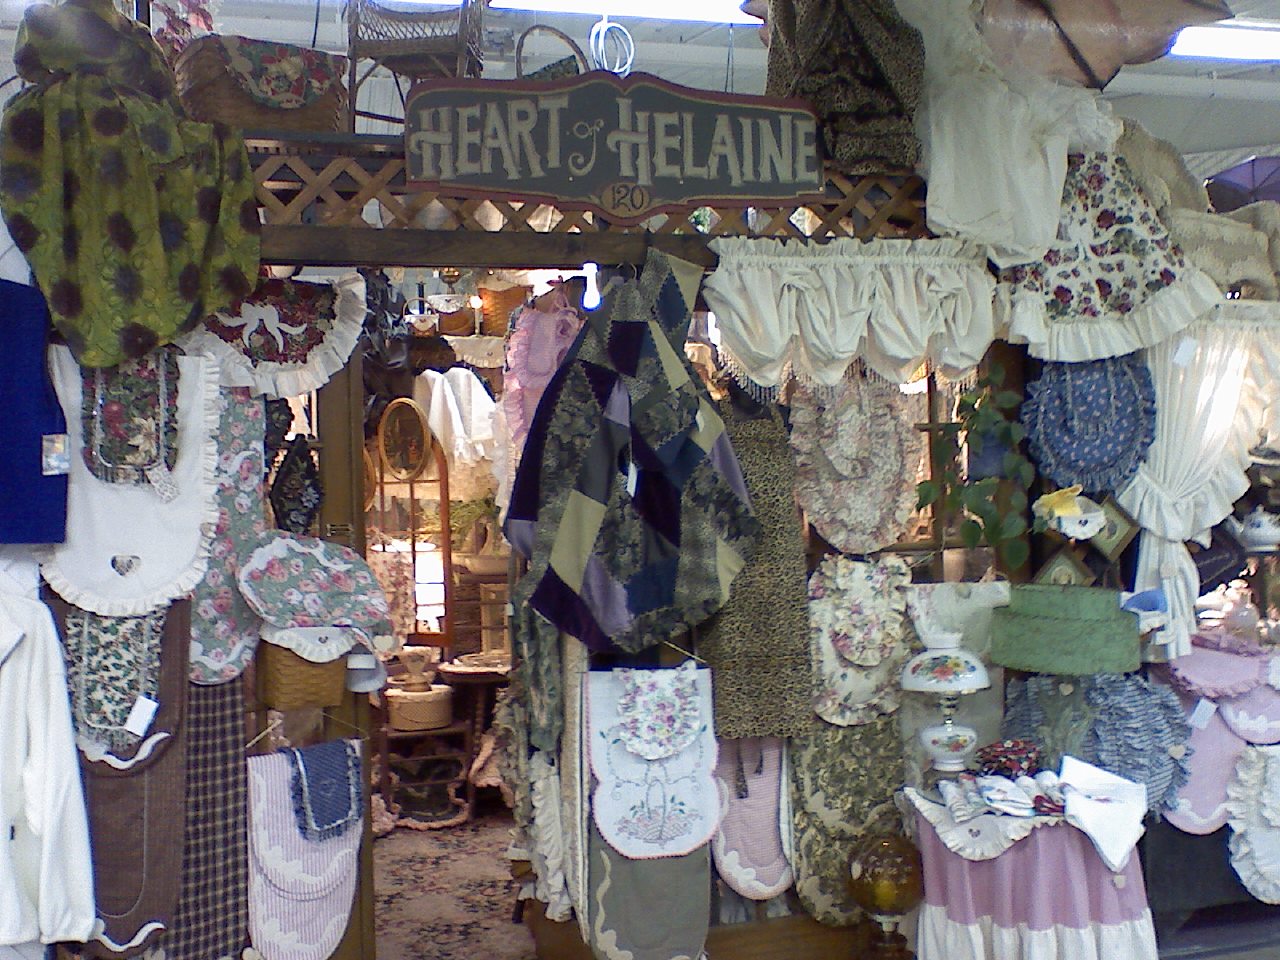 Heart of Helaine Shop located at the Hartville Marketplace and Flea Market in Hartville, Ohio